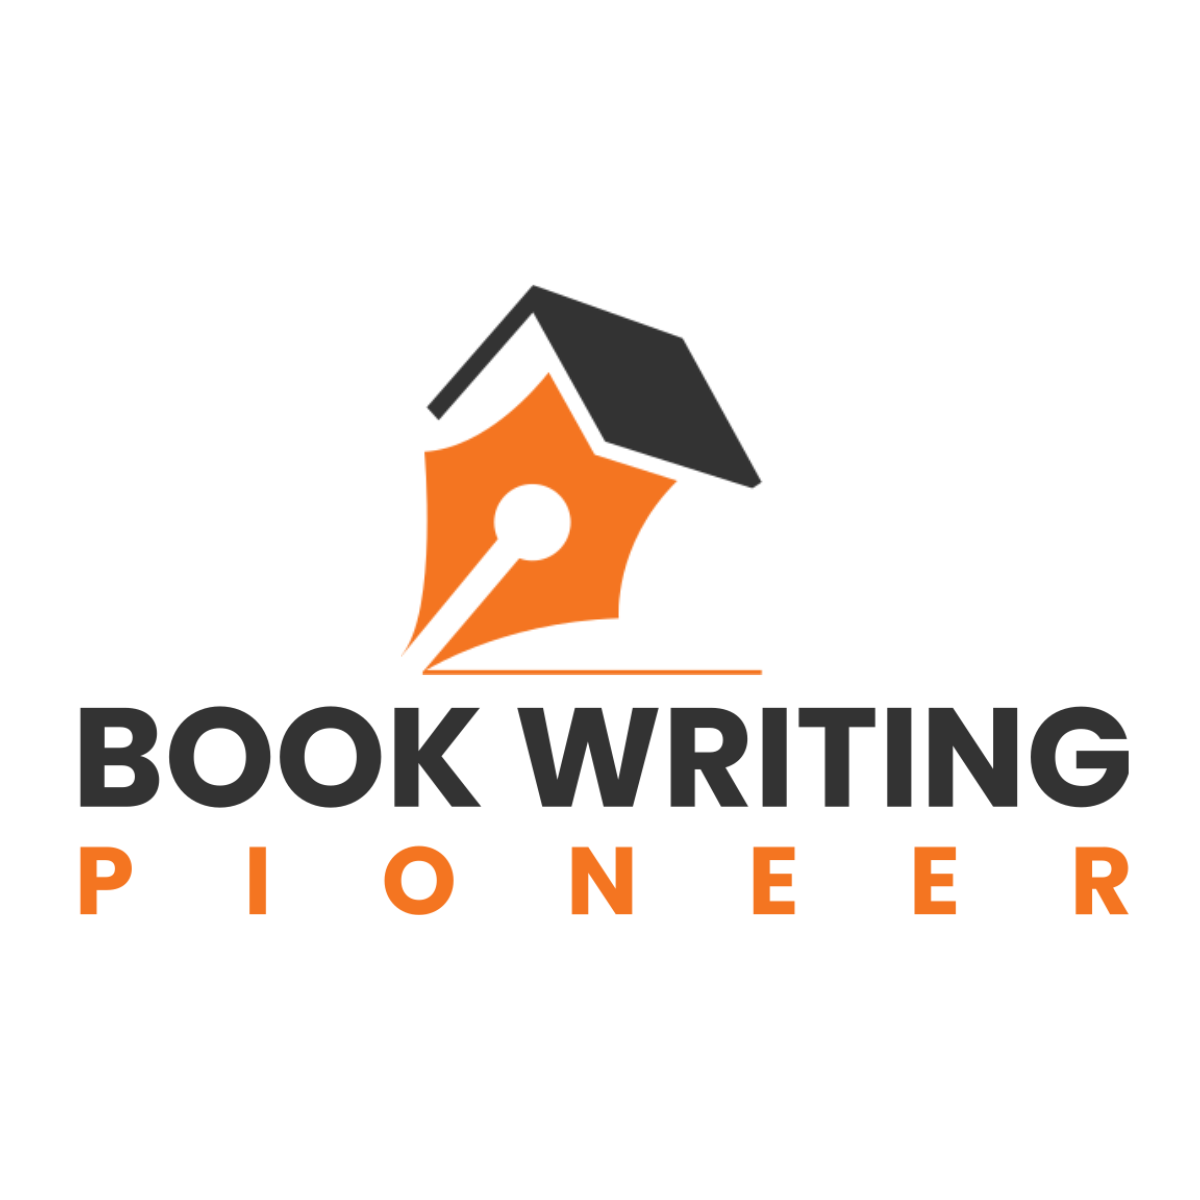 Book Writing Pioneer provides the best book writing service in the market